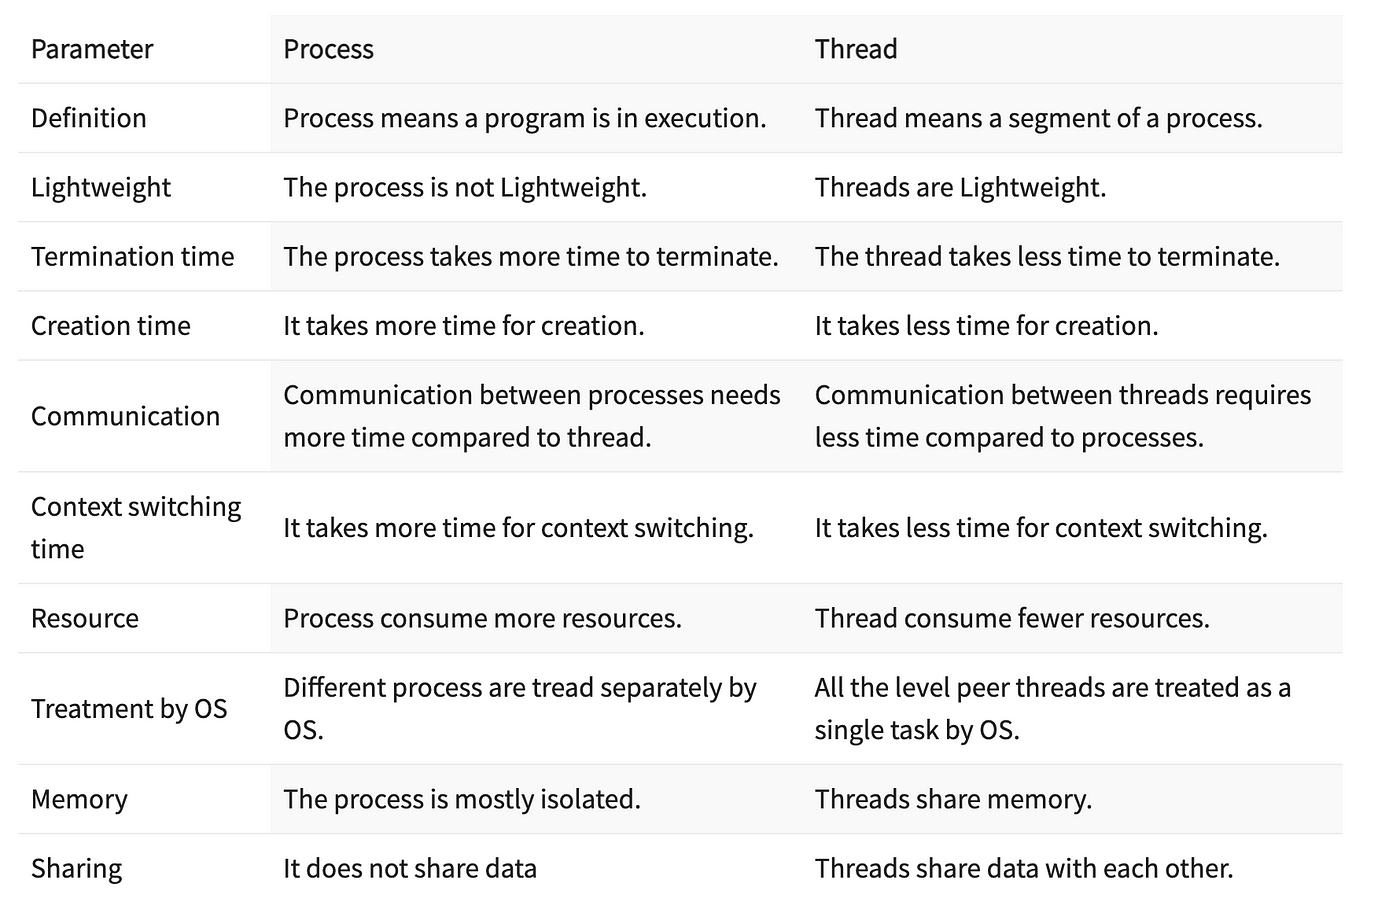 Process vs Thread: What's the difference?, by Jong Hyuck Won